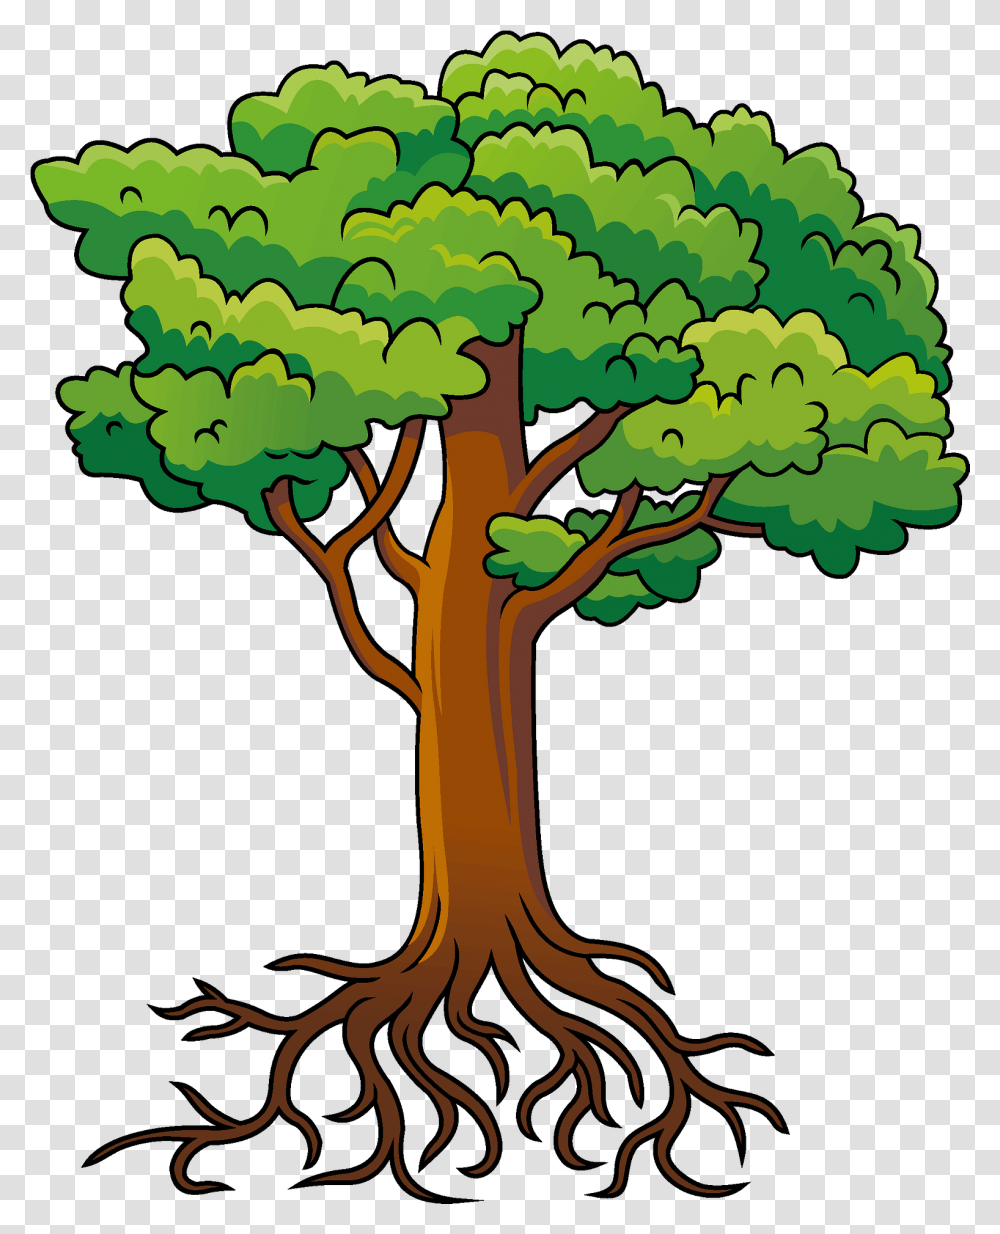 Tree With Roots Clipart Green Tree With Roots Clipart, Plant, Tree Trunk Transparent Png